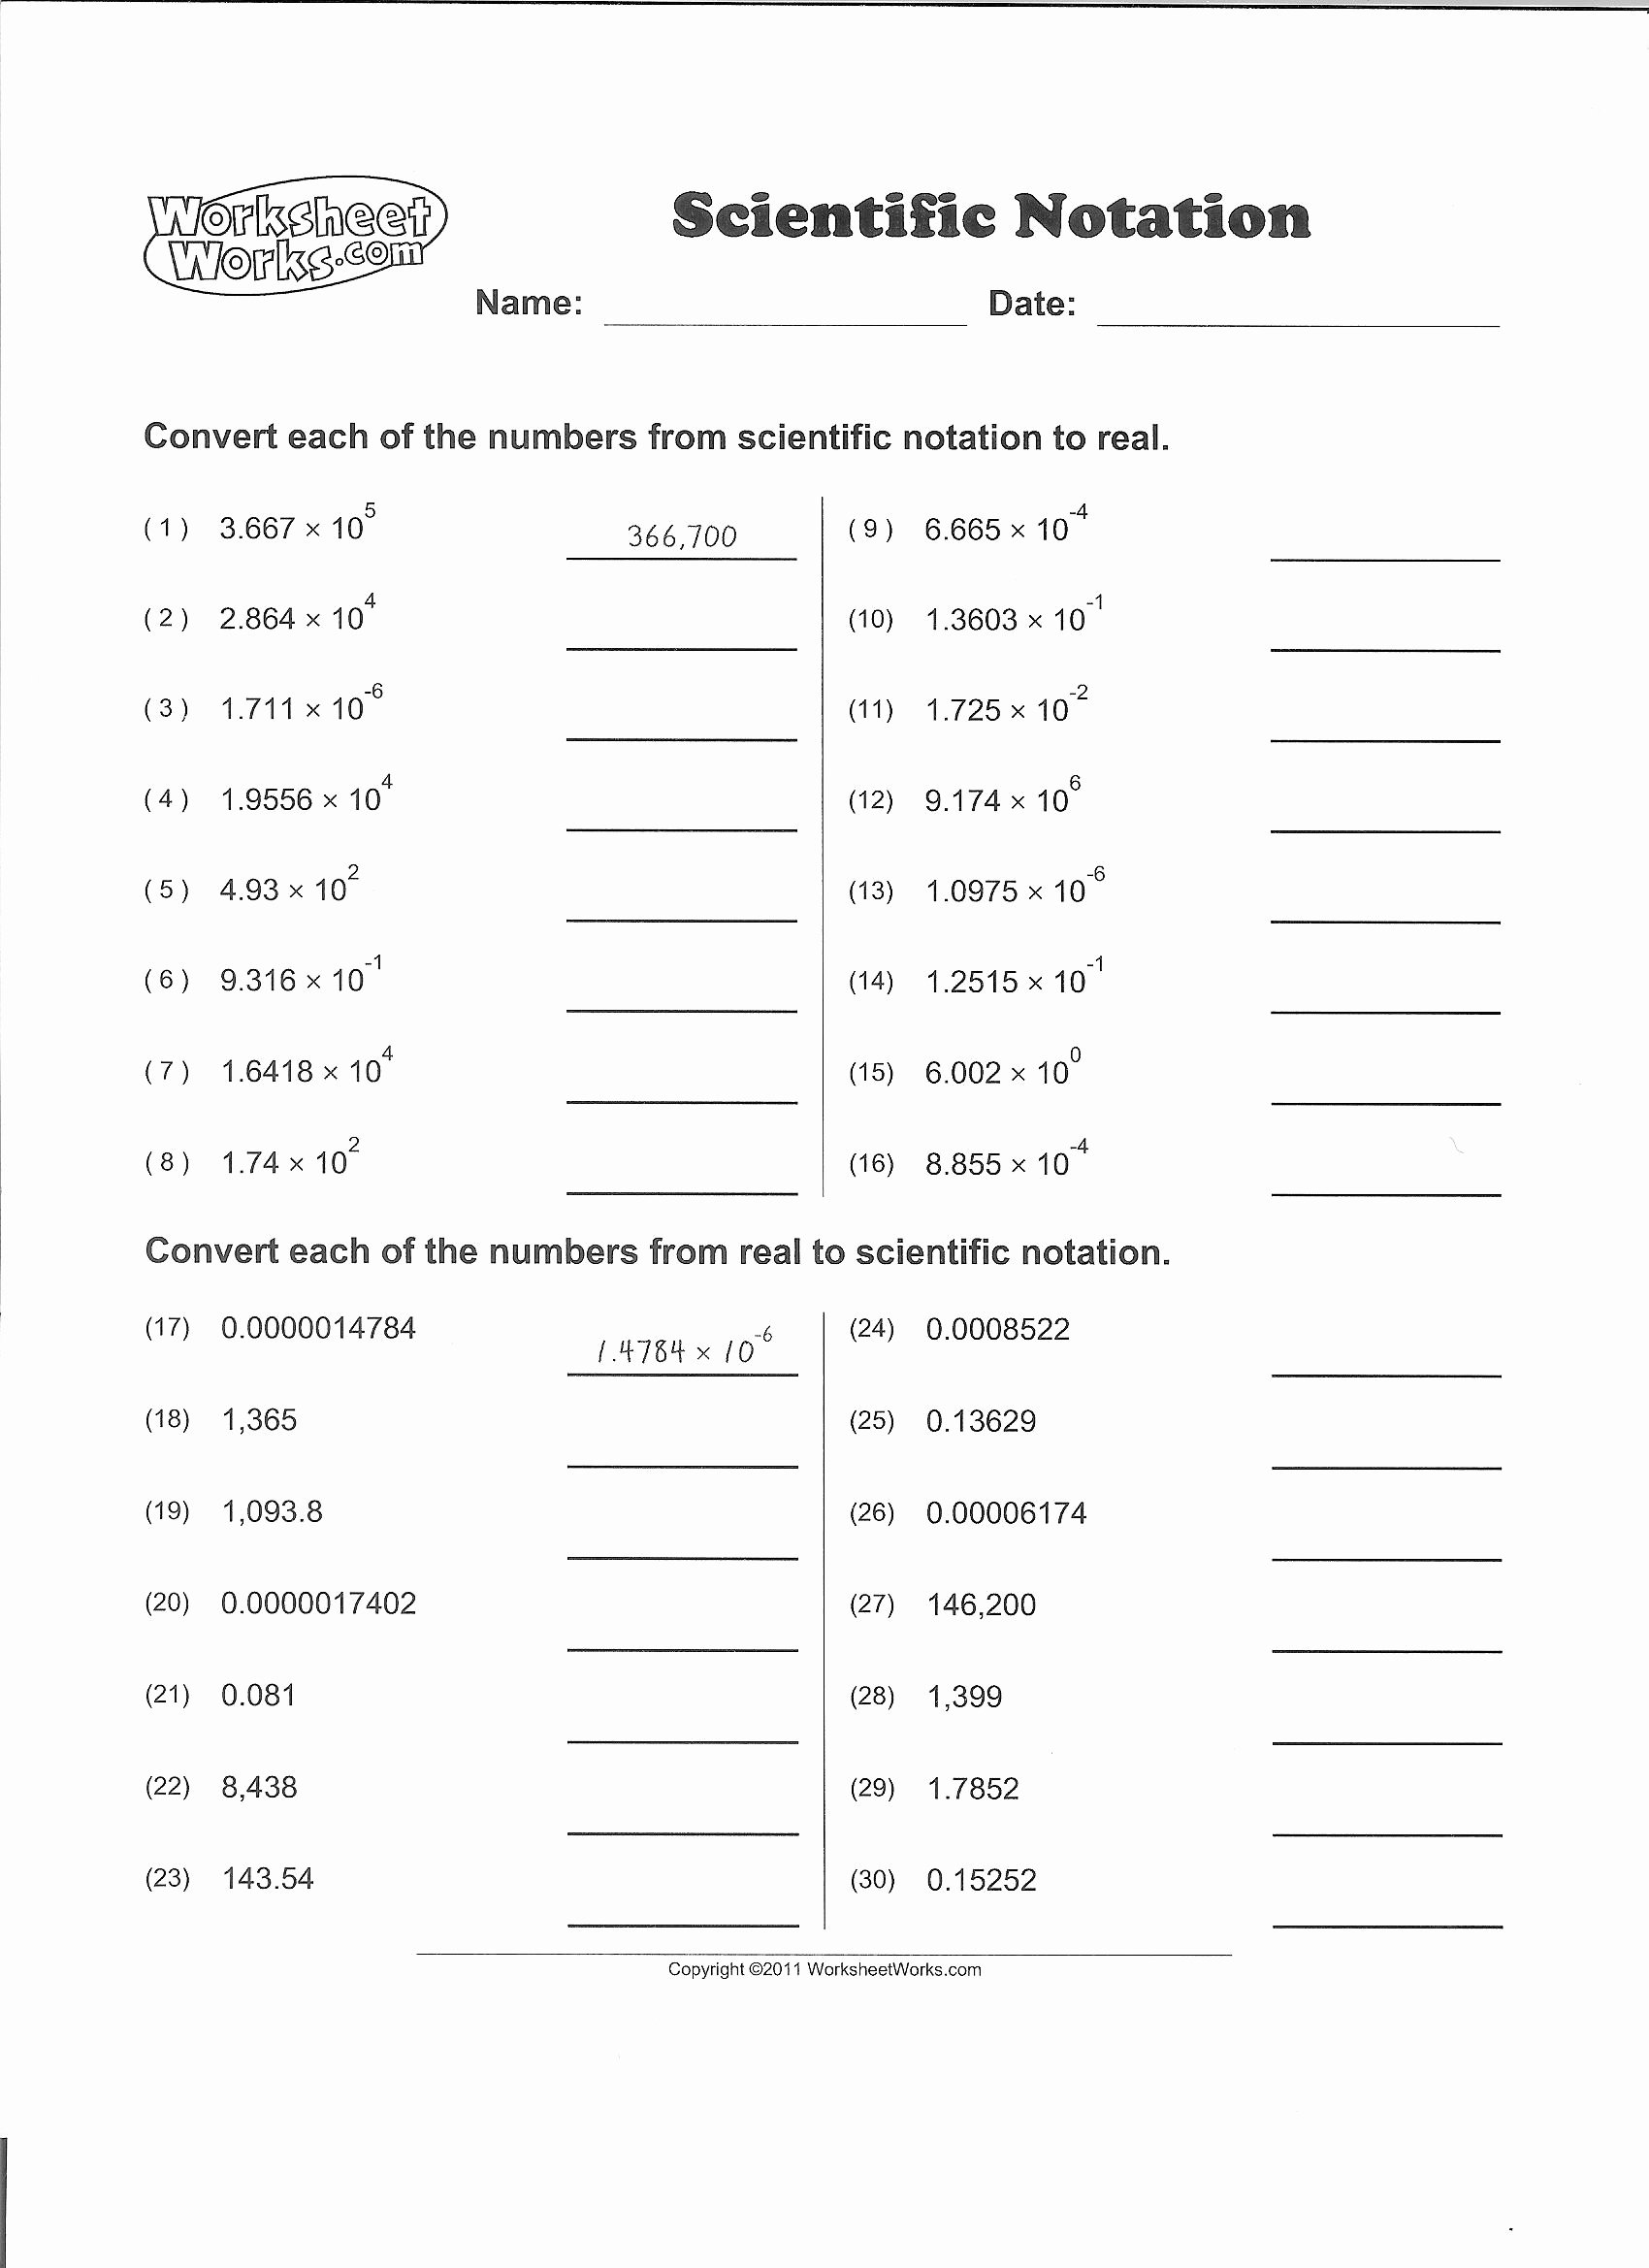 Scientific Notation Worksheet with Answers Best Of Heritage High Teachers Courses and Files